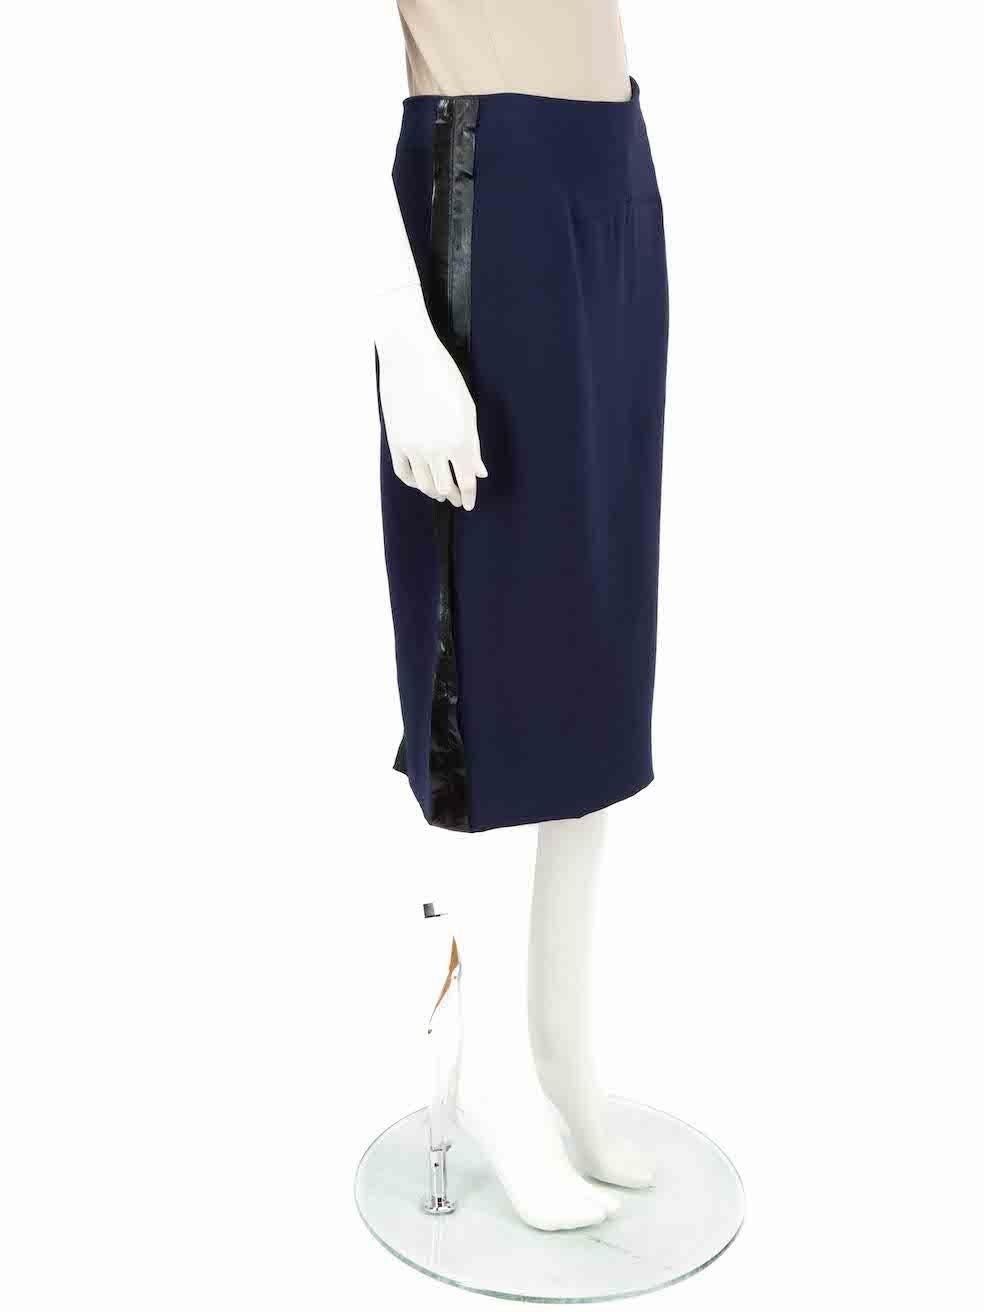 CONDITION is Very good. Minimal wear to skirt is evident. Minimal wear to the rear zip with tarnishing to the metal on this used Victoria Beckham designer resale item.
 
 
 
 Details
 
 
 Model: No.012
 
 Navy
 
 Silk
 
 Pencil skirt
 
 Knee length
